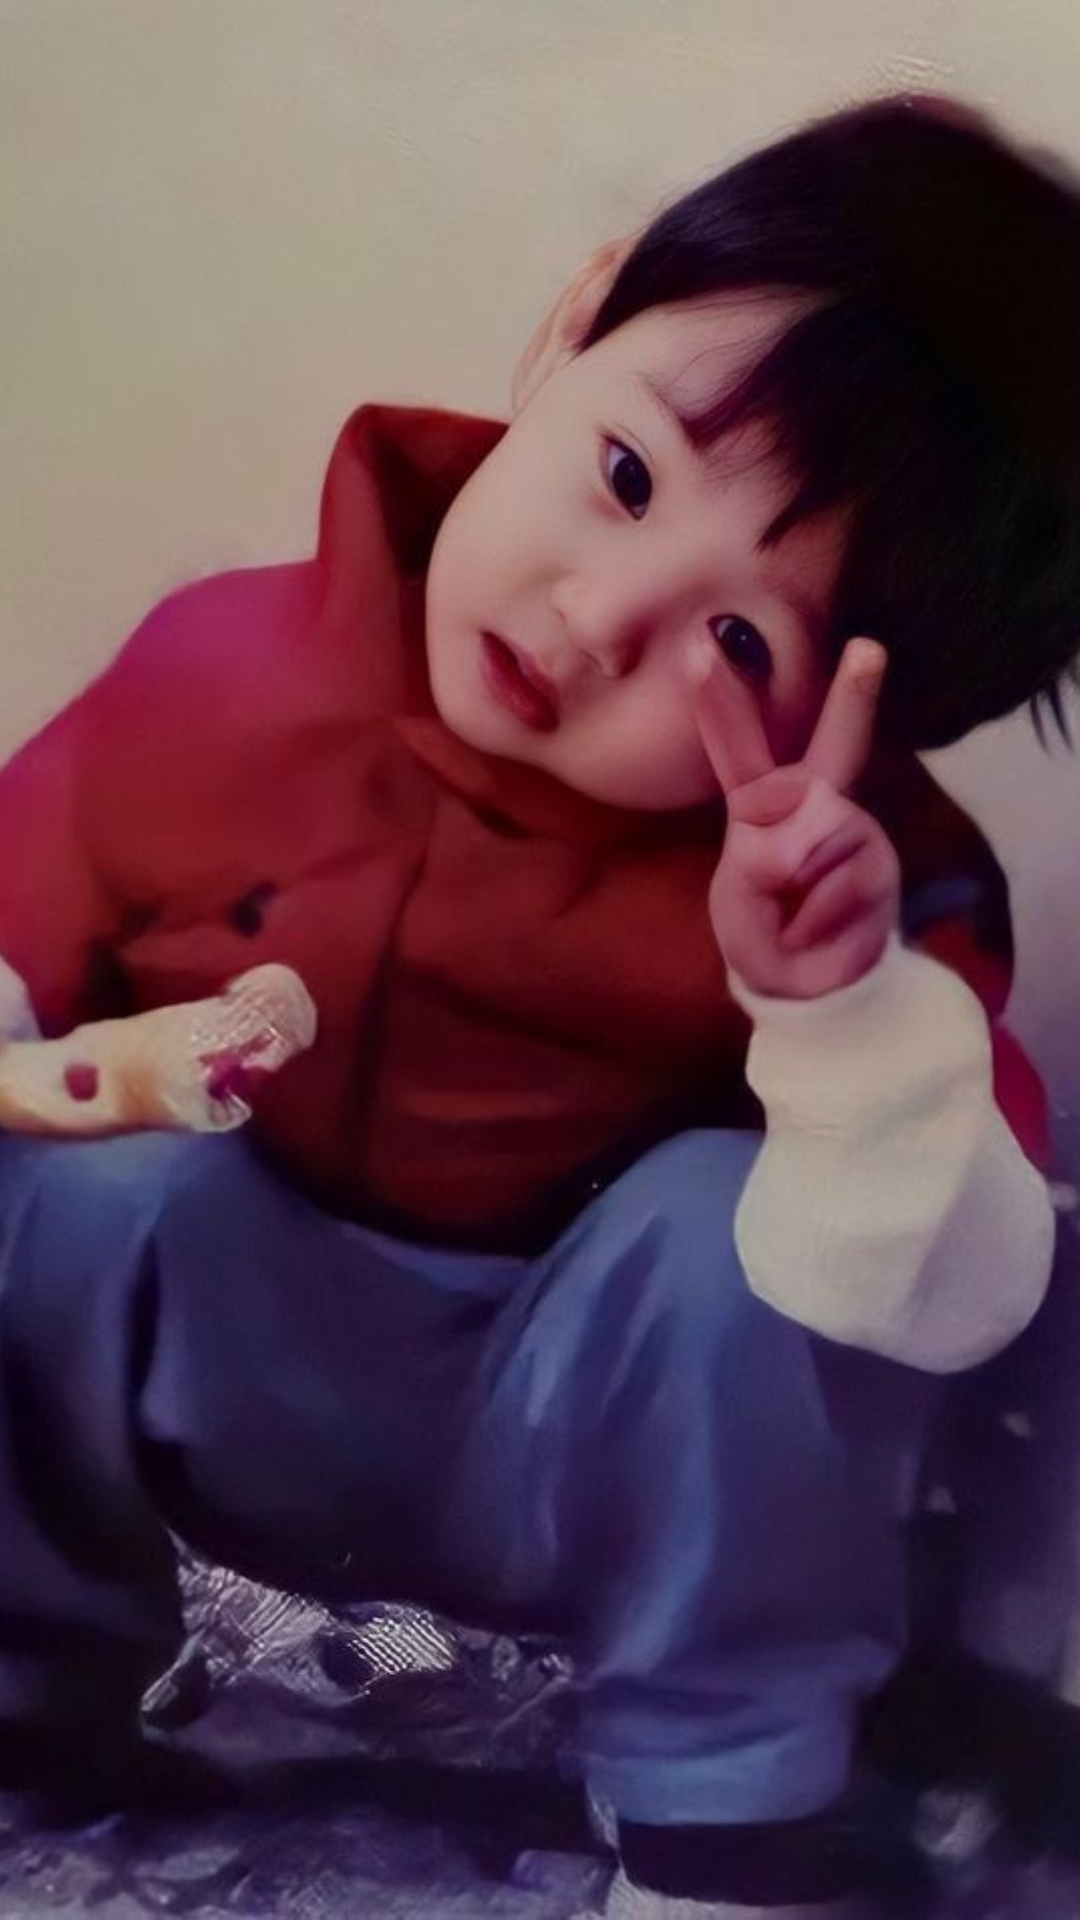 BTS Jungkook's childhood photos are as cute as a button